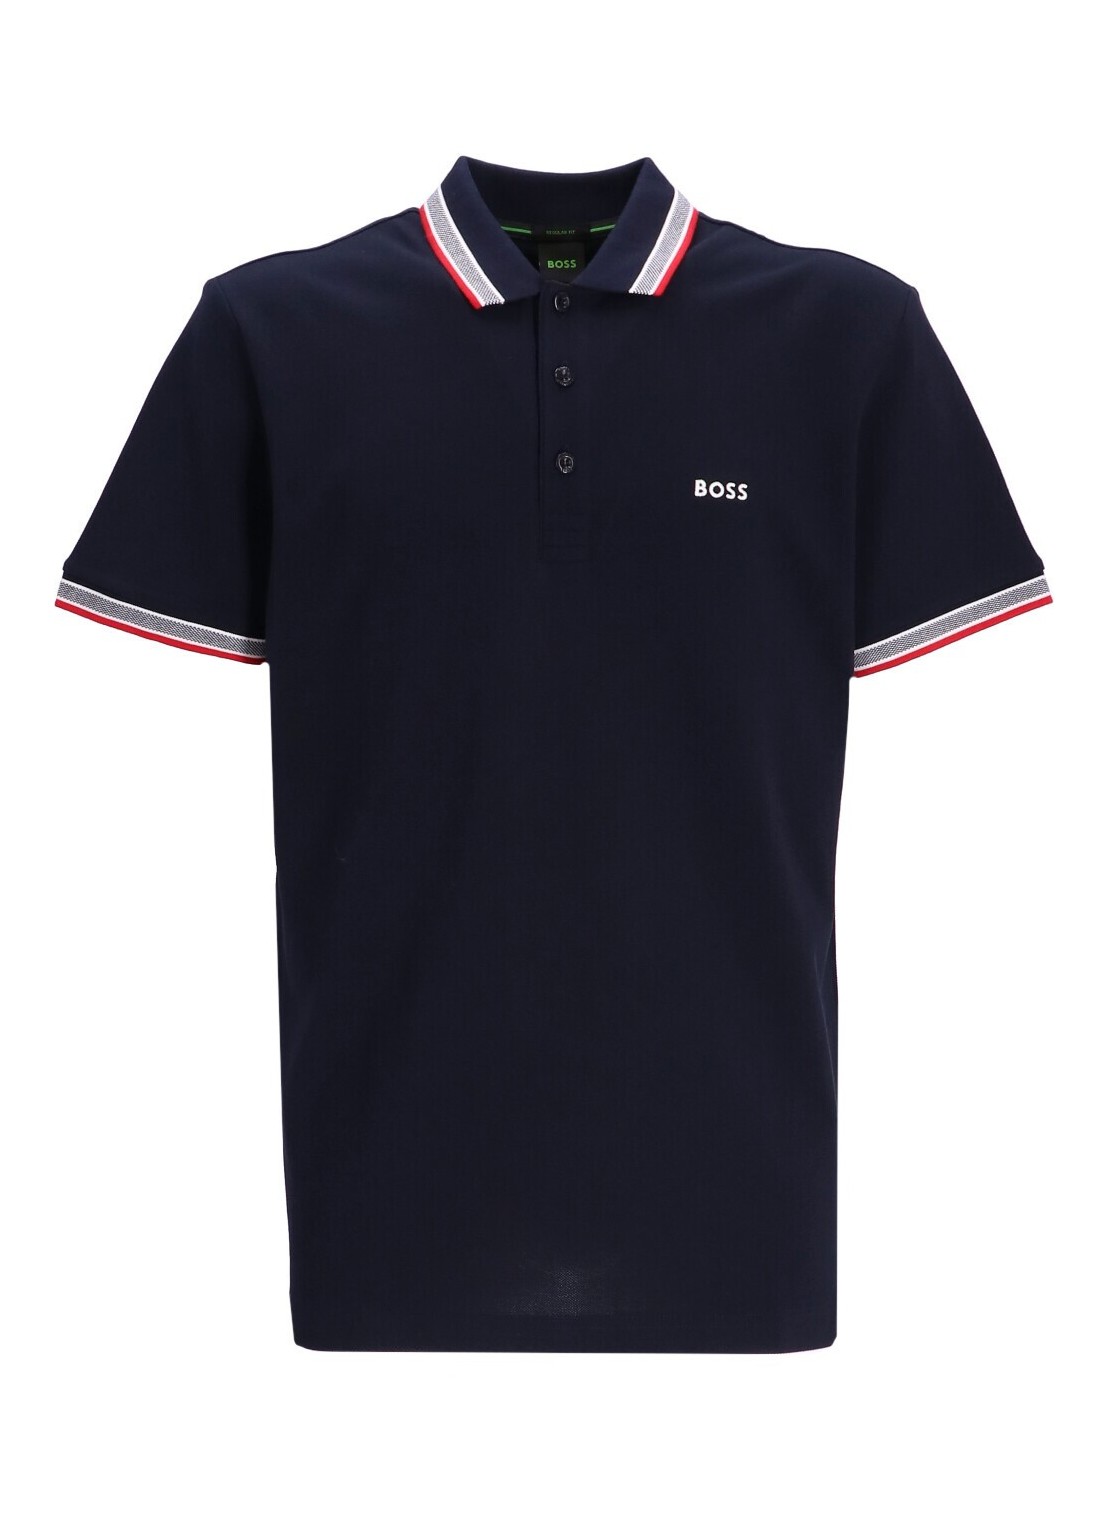 Polo boss paddy curved - 50468983 400 talla S
 